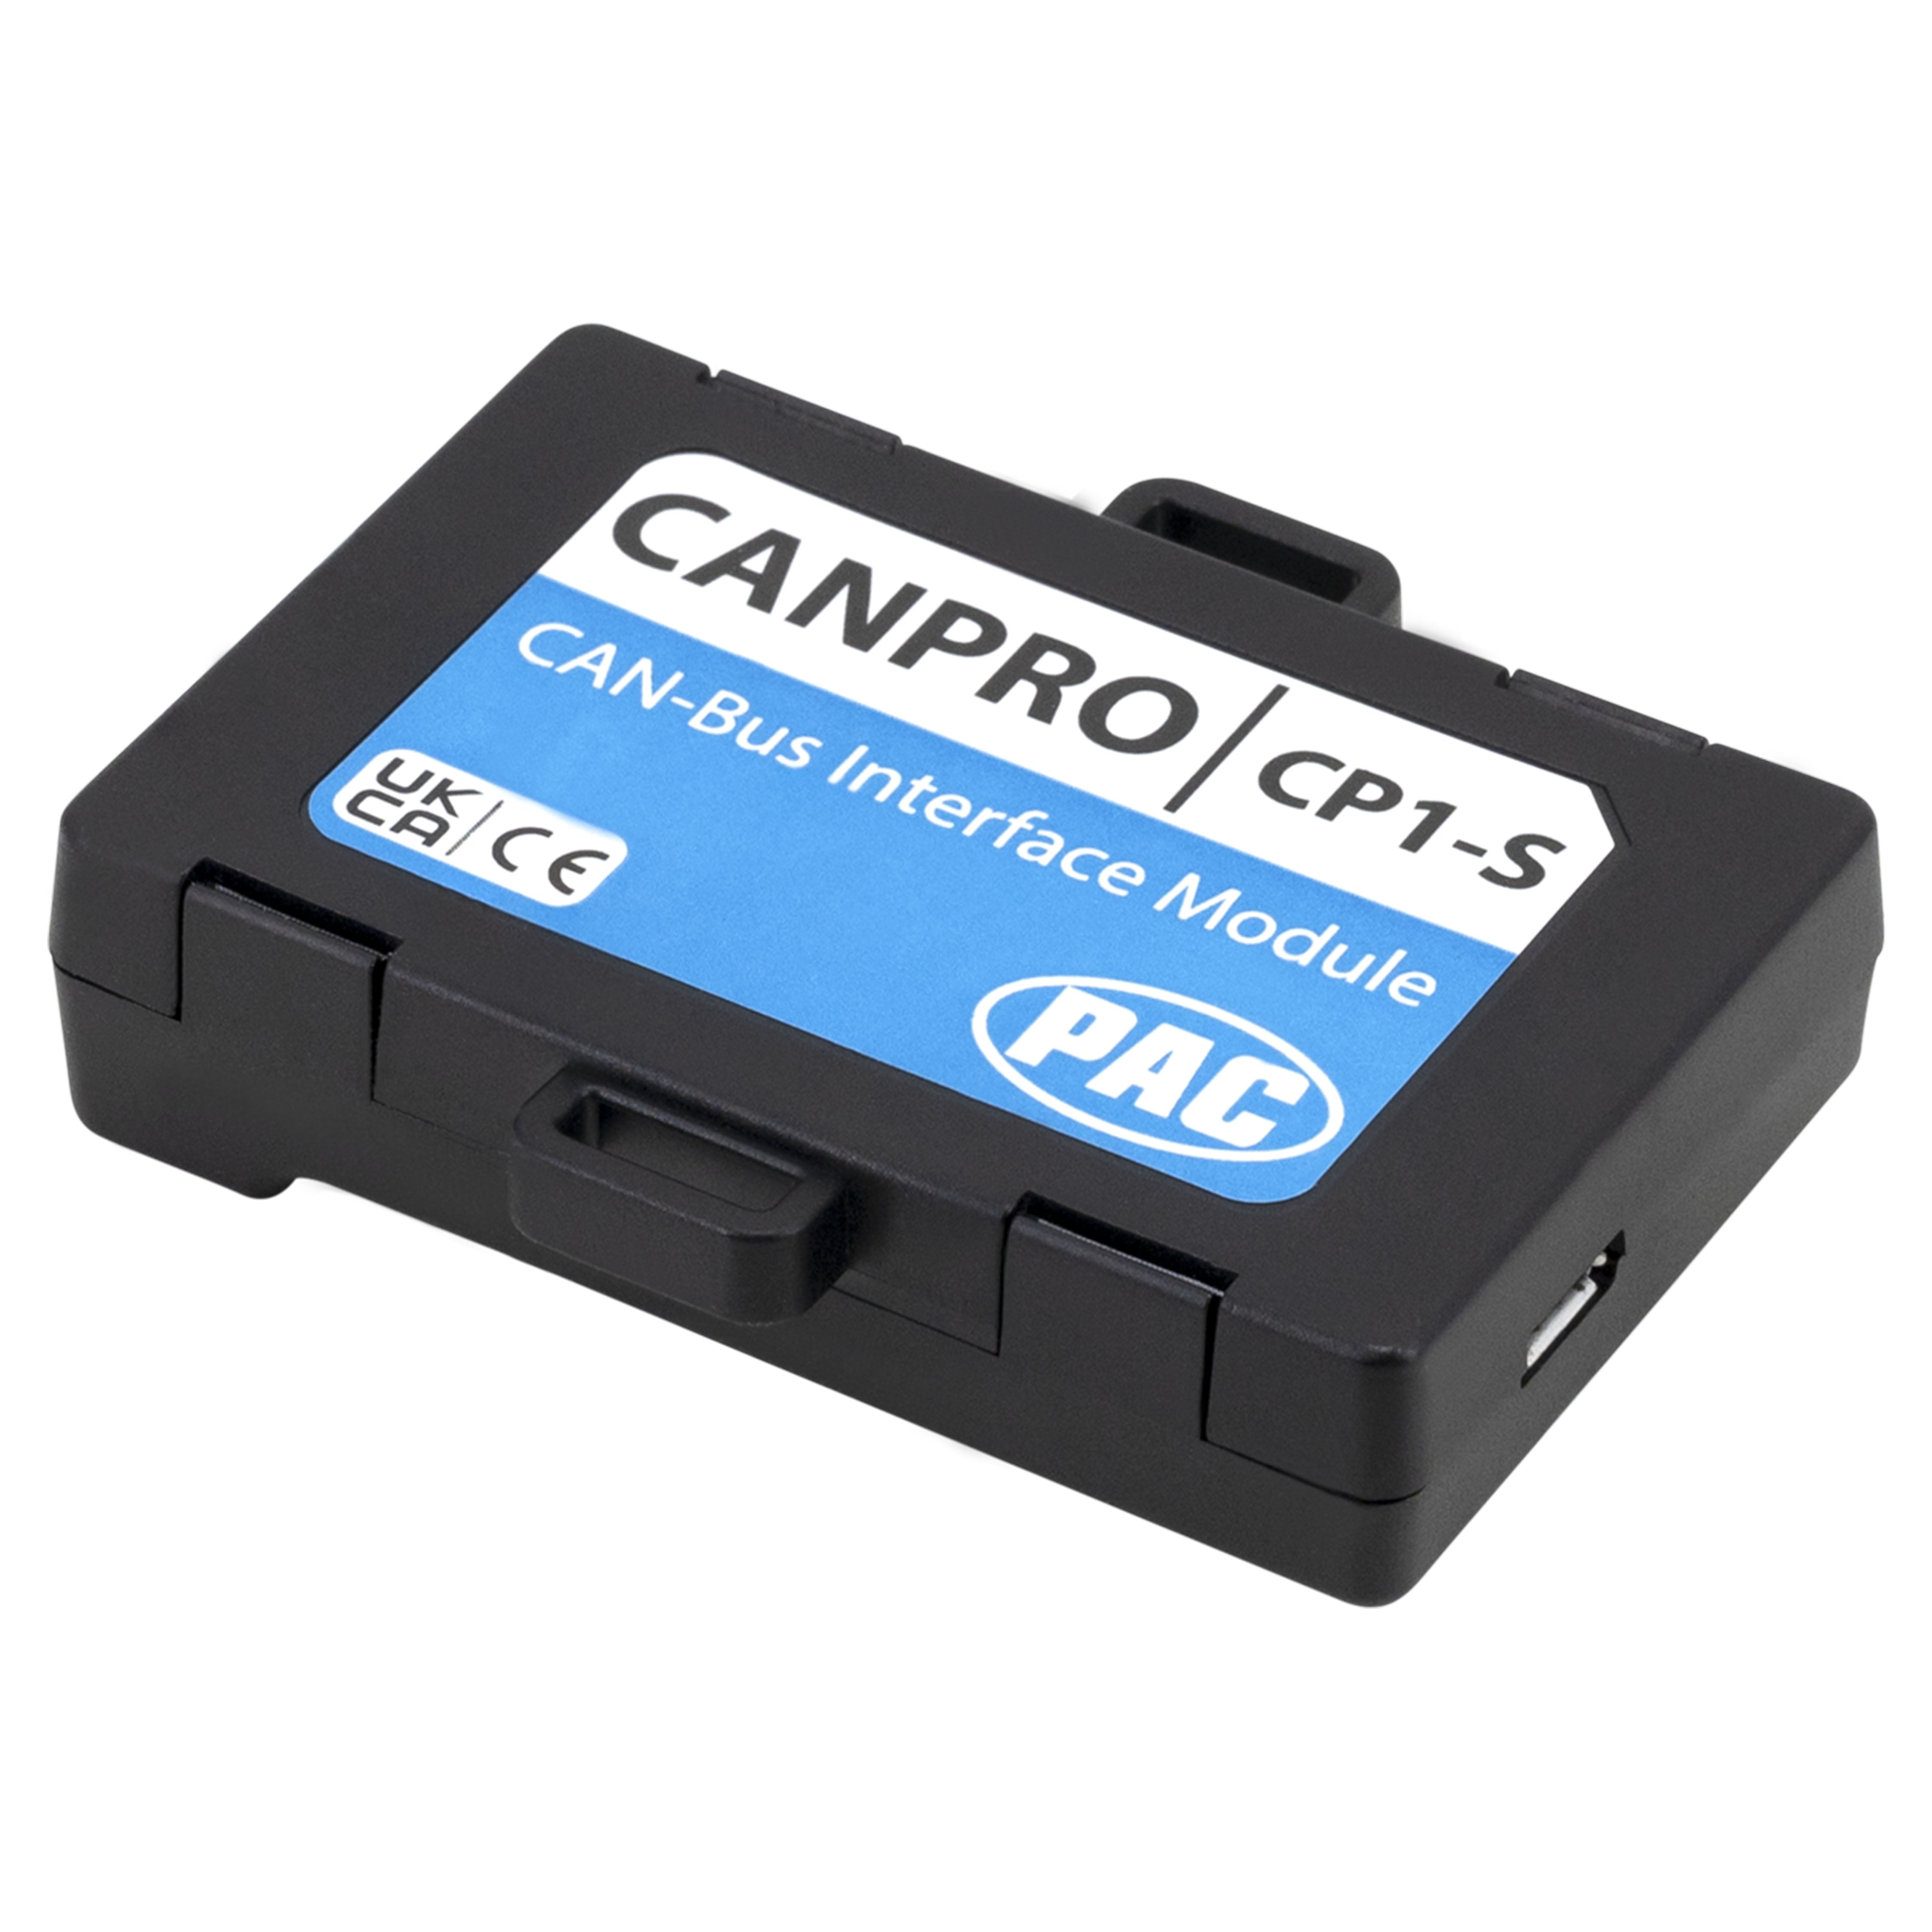 PAC CP1-S, CAN-Bus Interface Trigger Module for Connecting Aftermarket Accessories